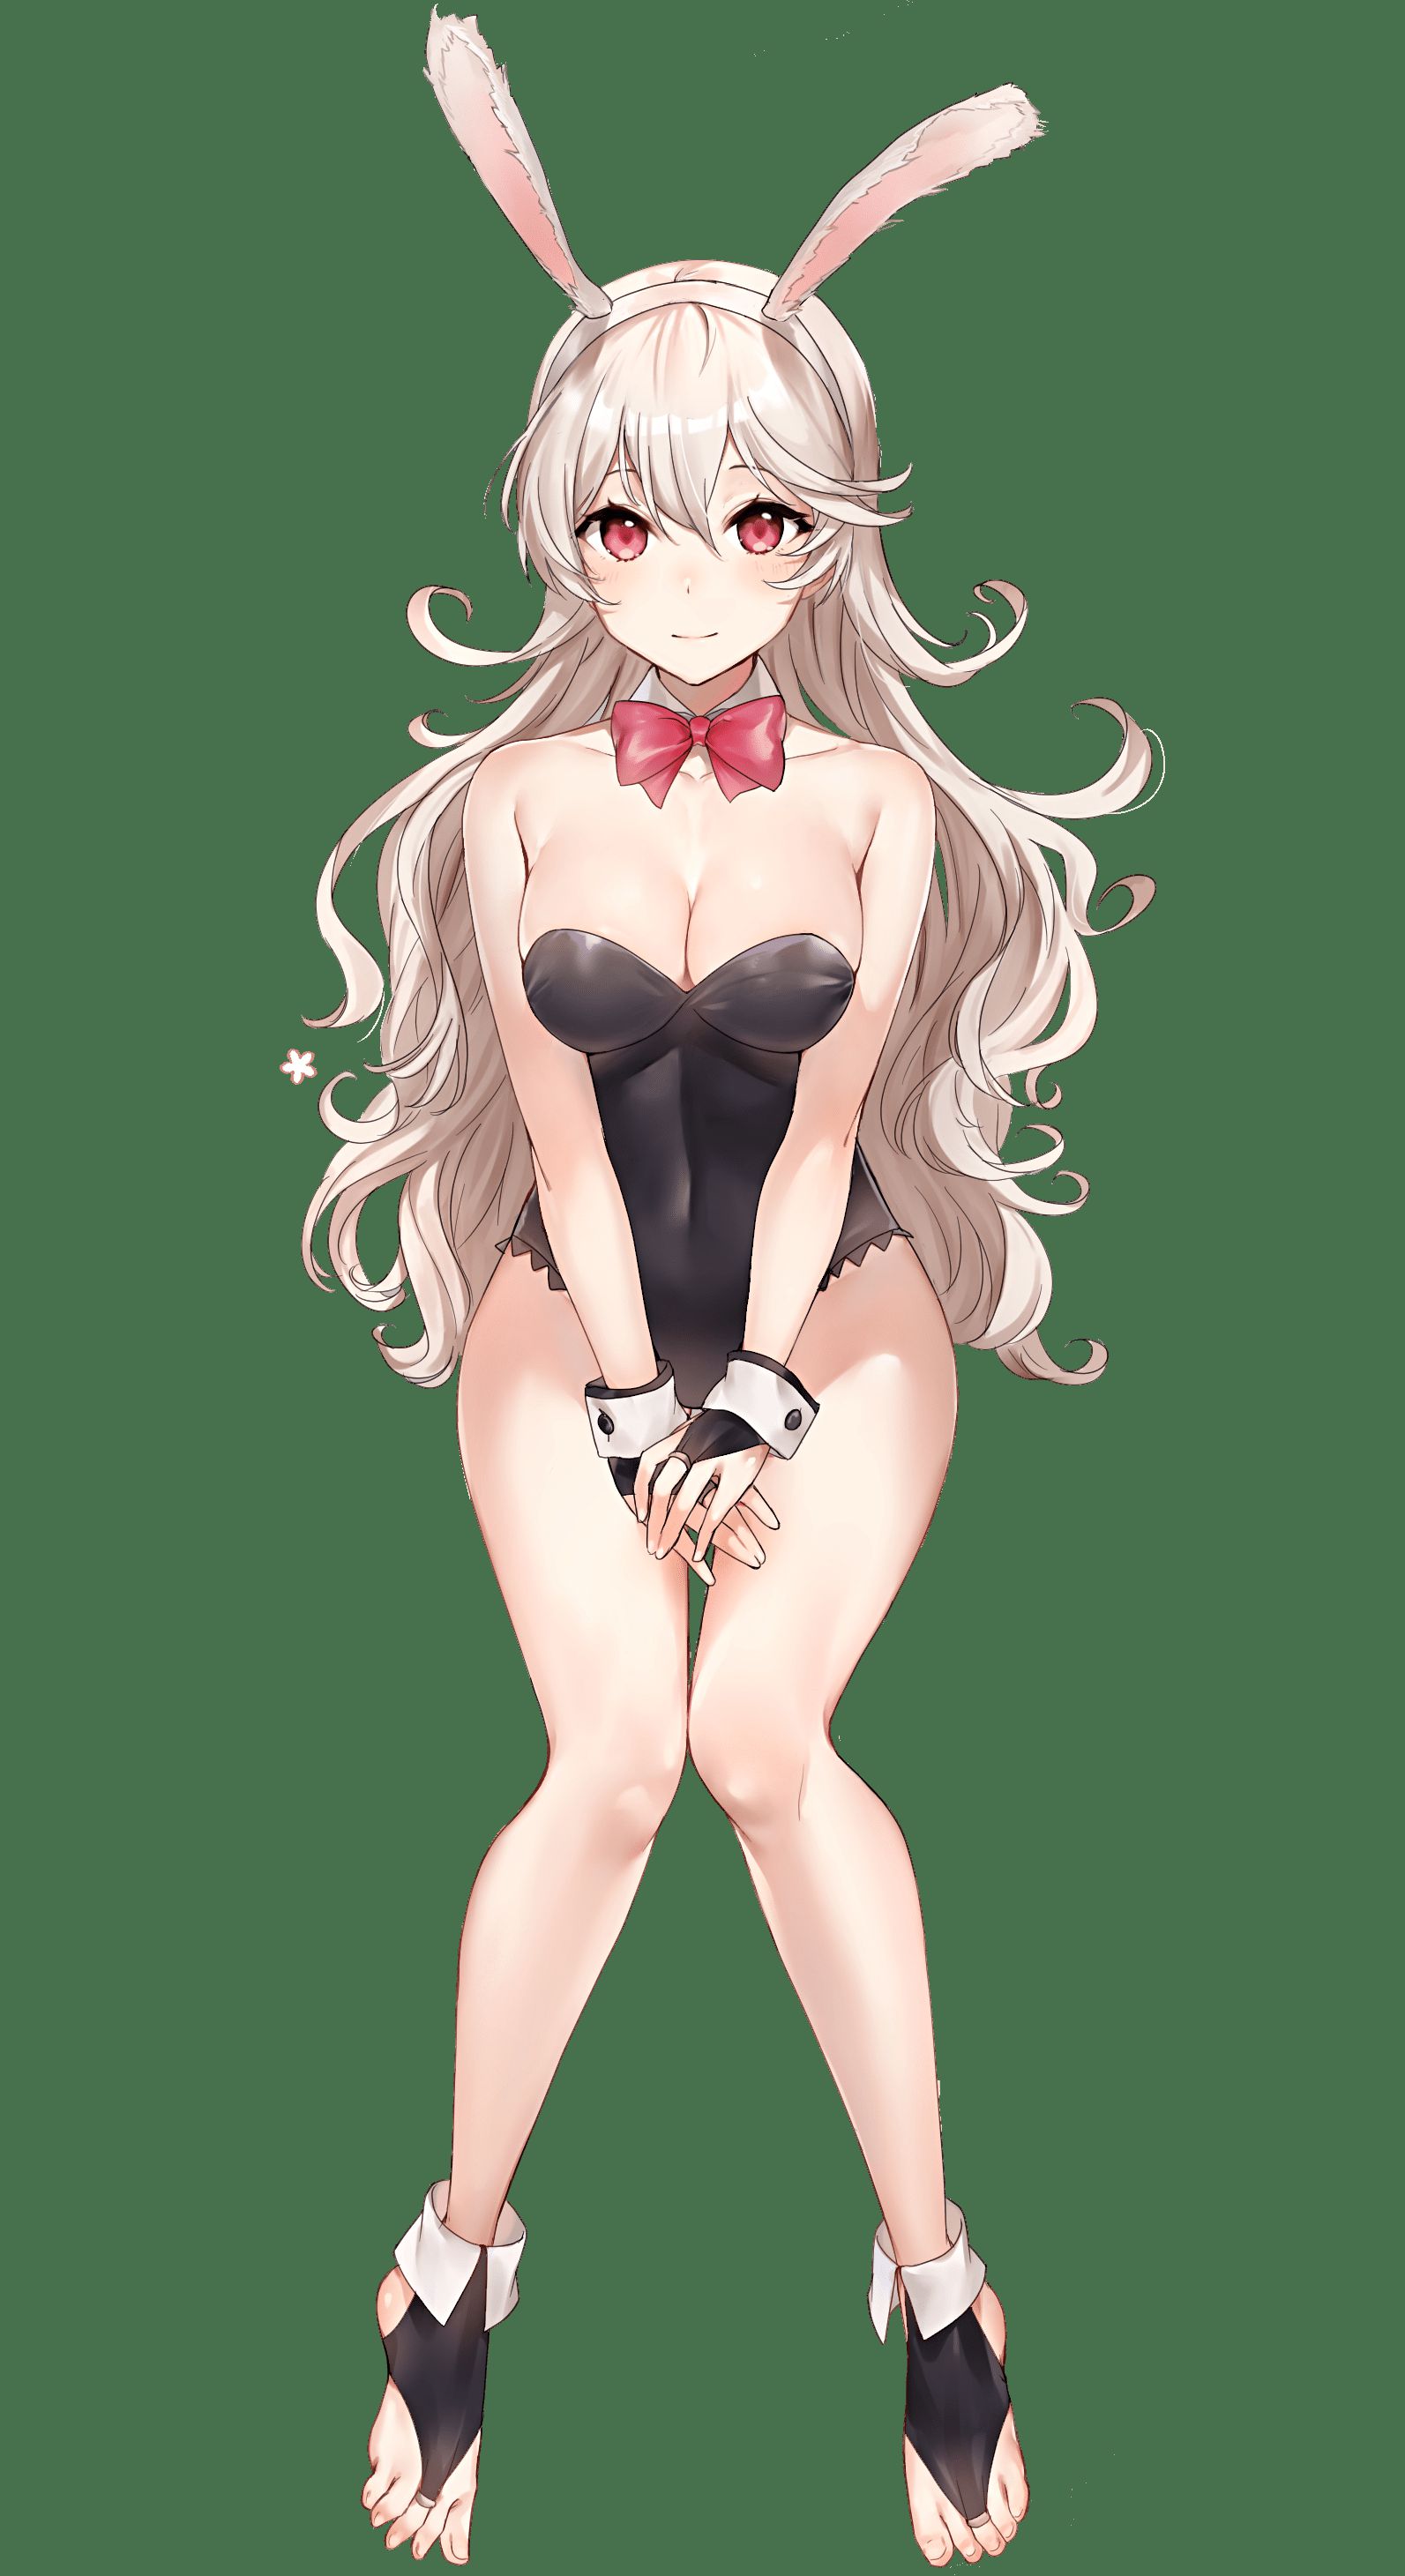 【Erocora Character Material】PNG background transparent erotic image such as anime characters Part 396 32